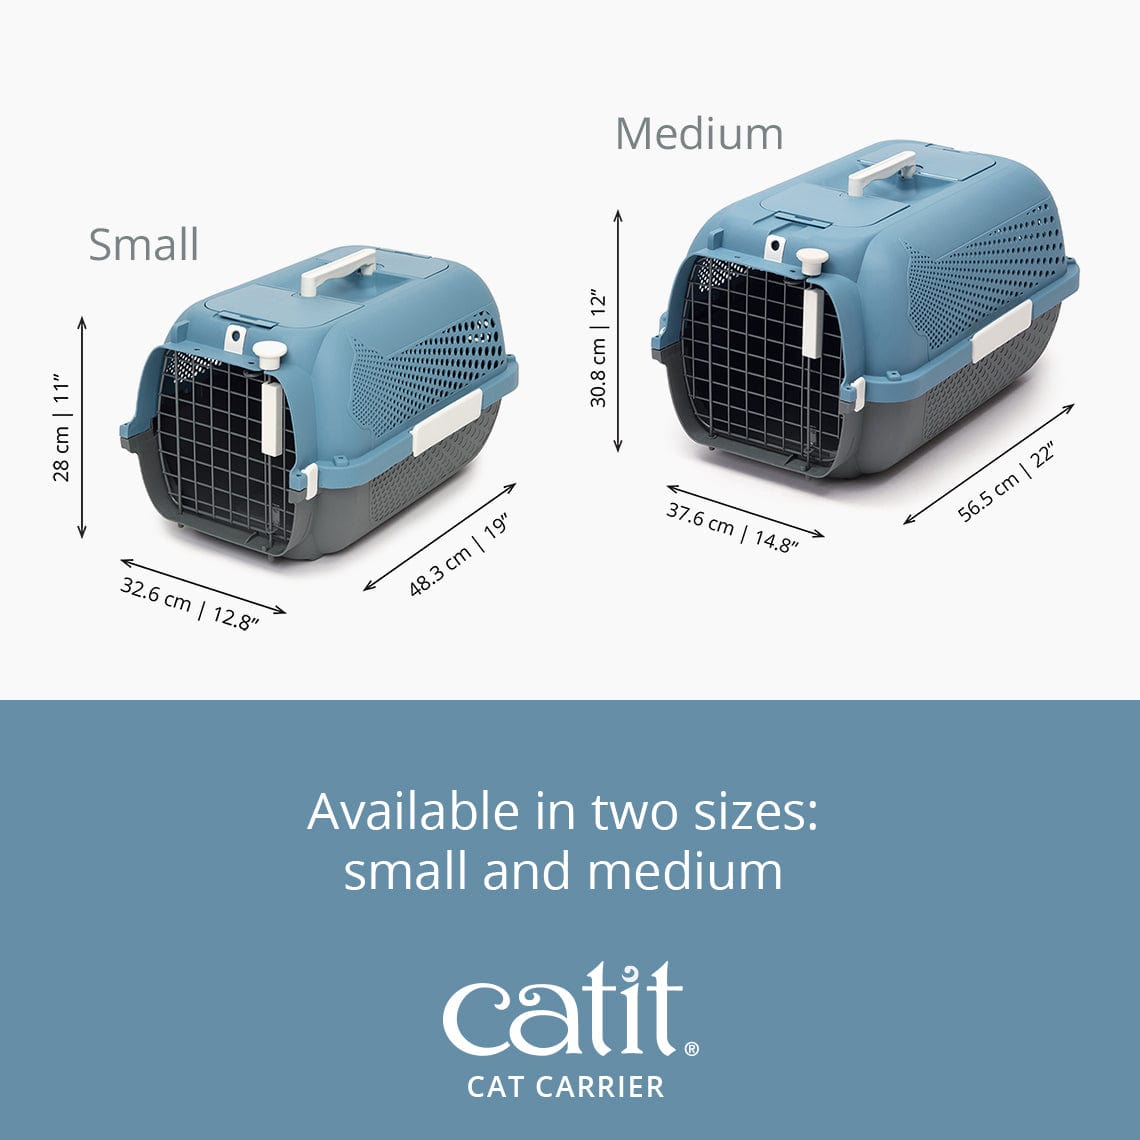 Finding the Perfect Cat Carrier – Choosing the Right Size Crate